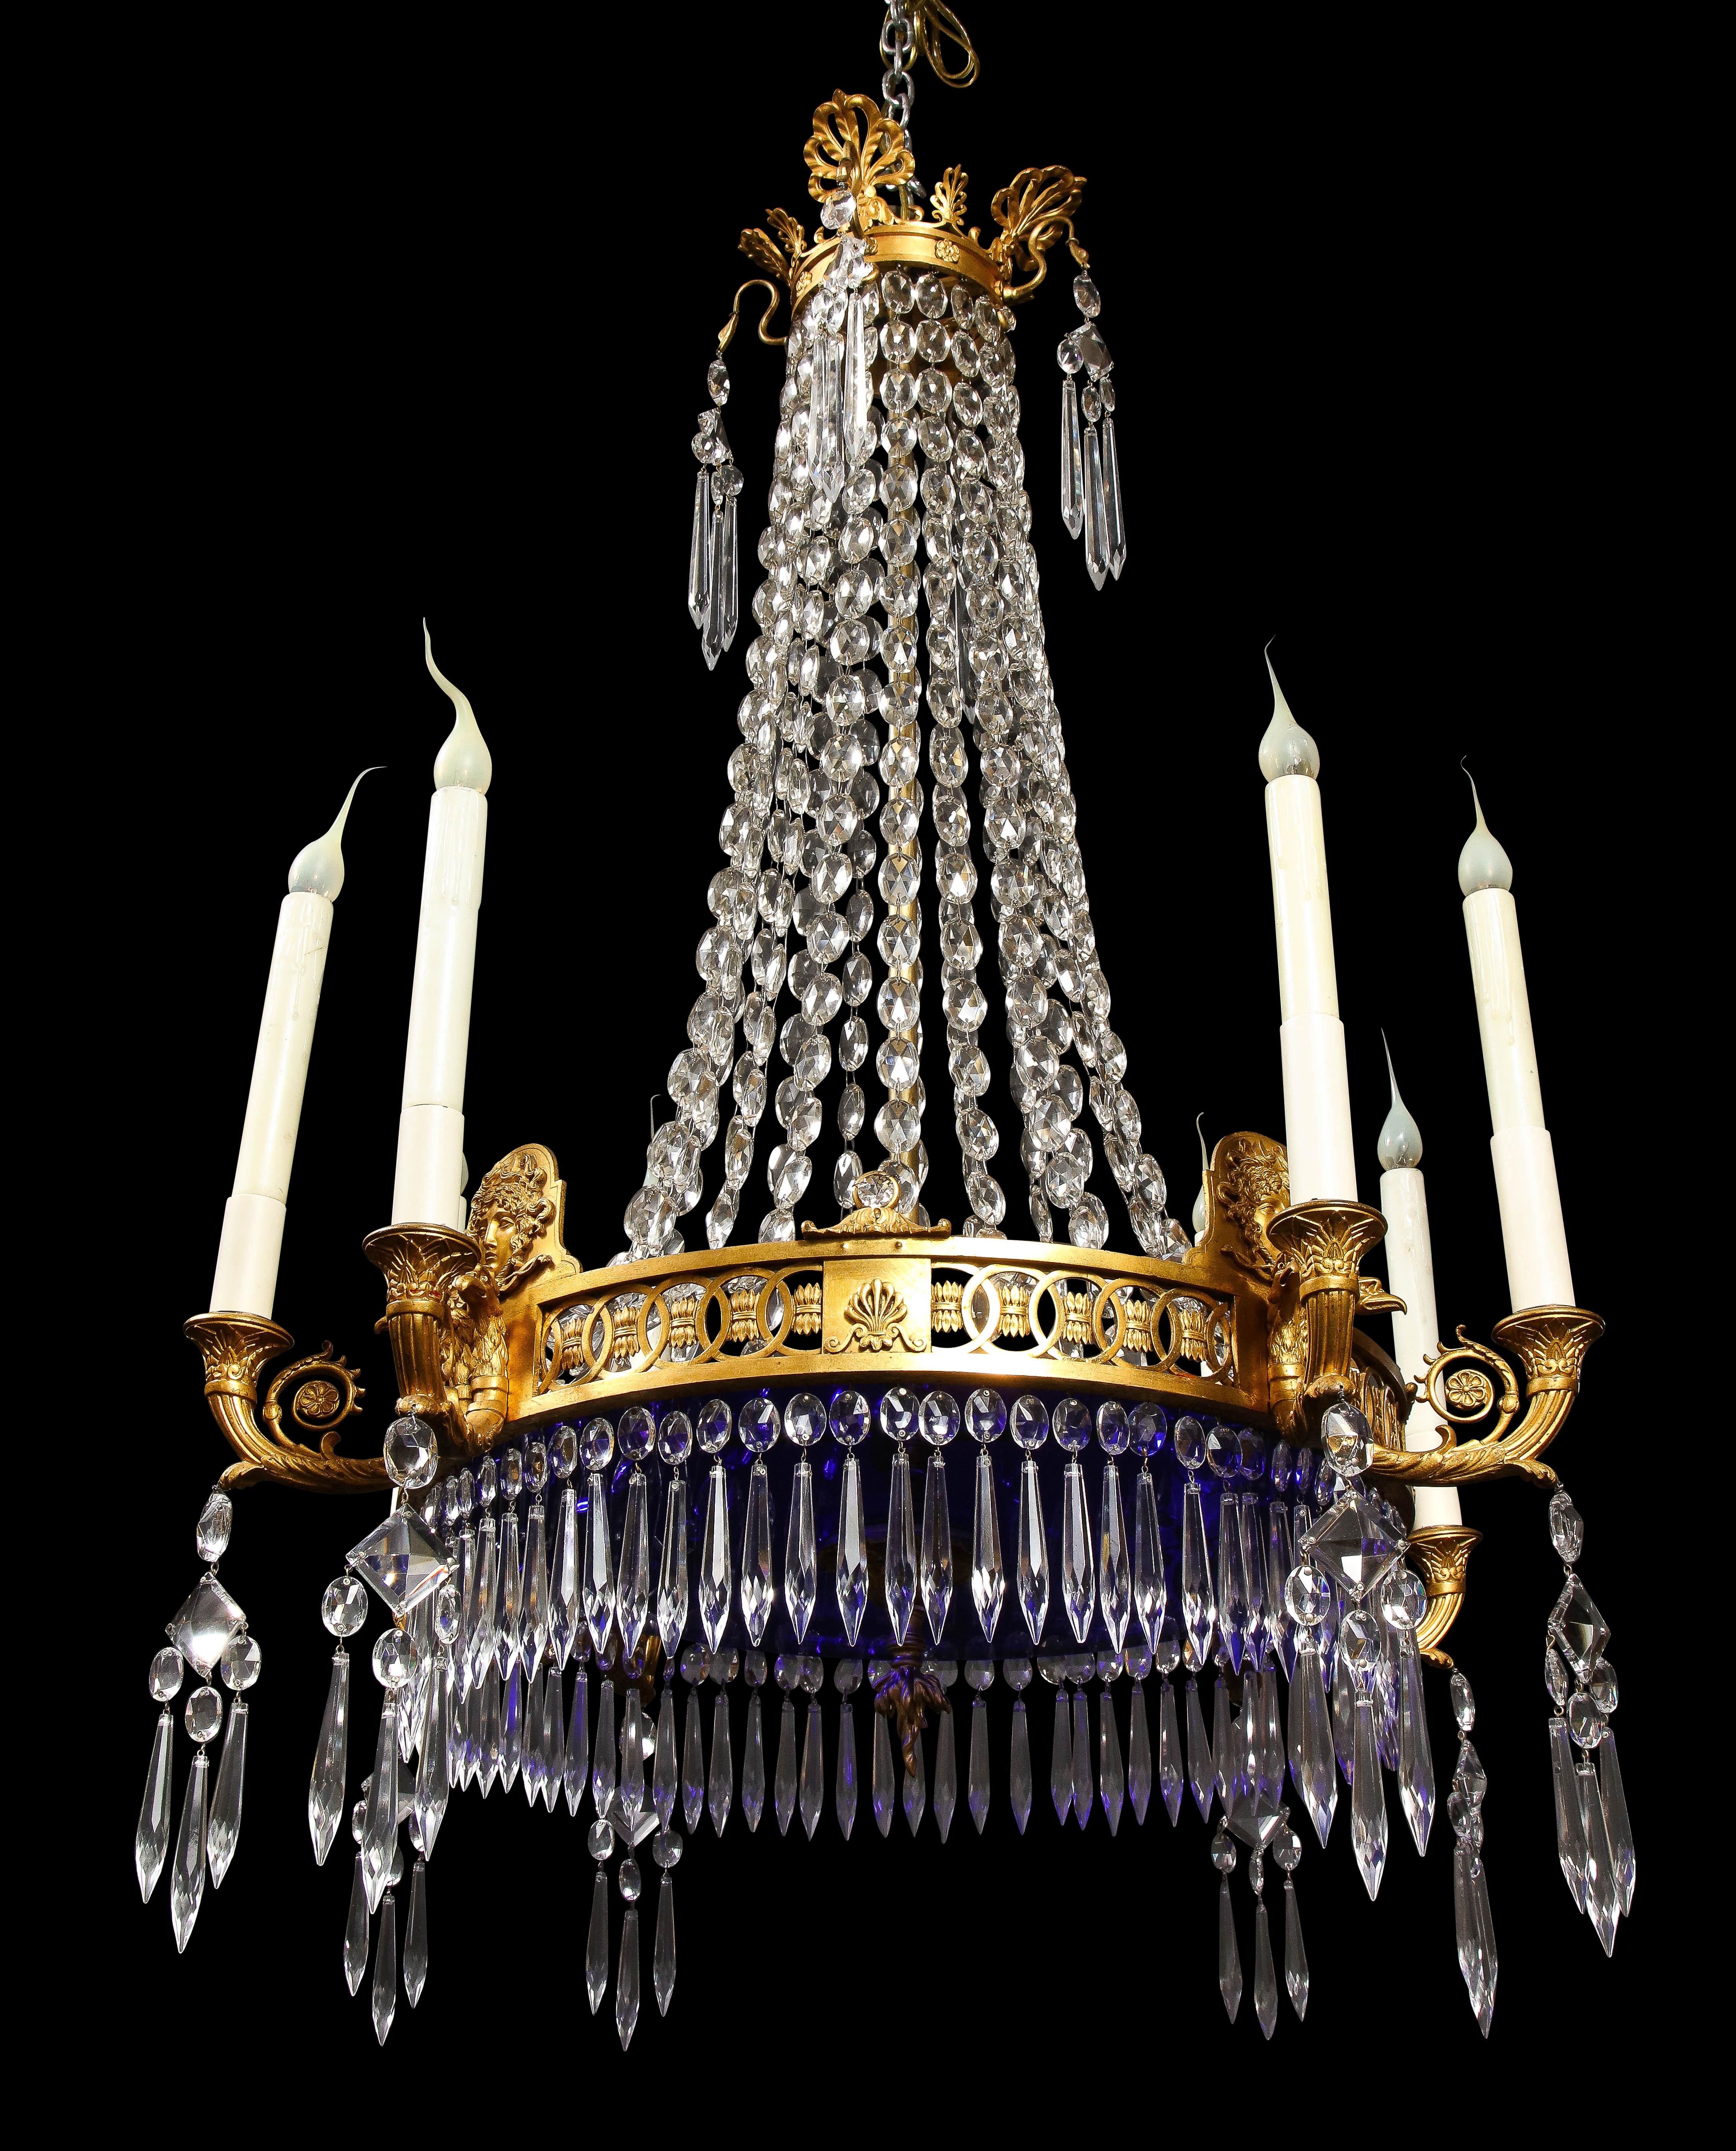 European Antique Russian Neoclassical Gilt Bronze and Cut Crystal Cobalt Glass Chandelier For Sale